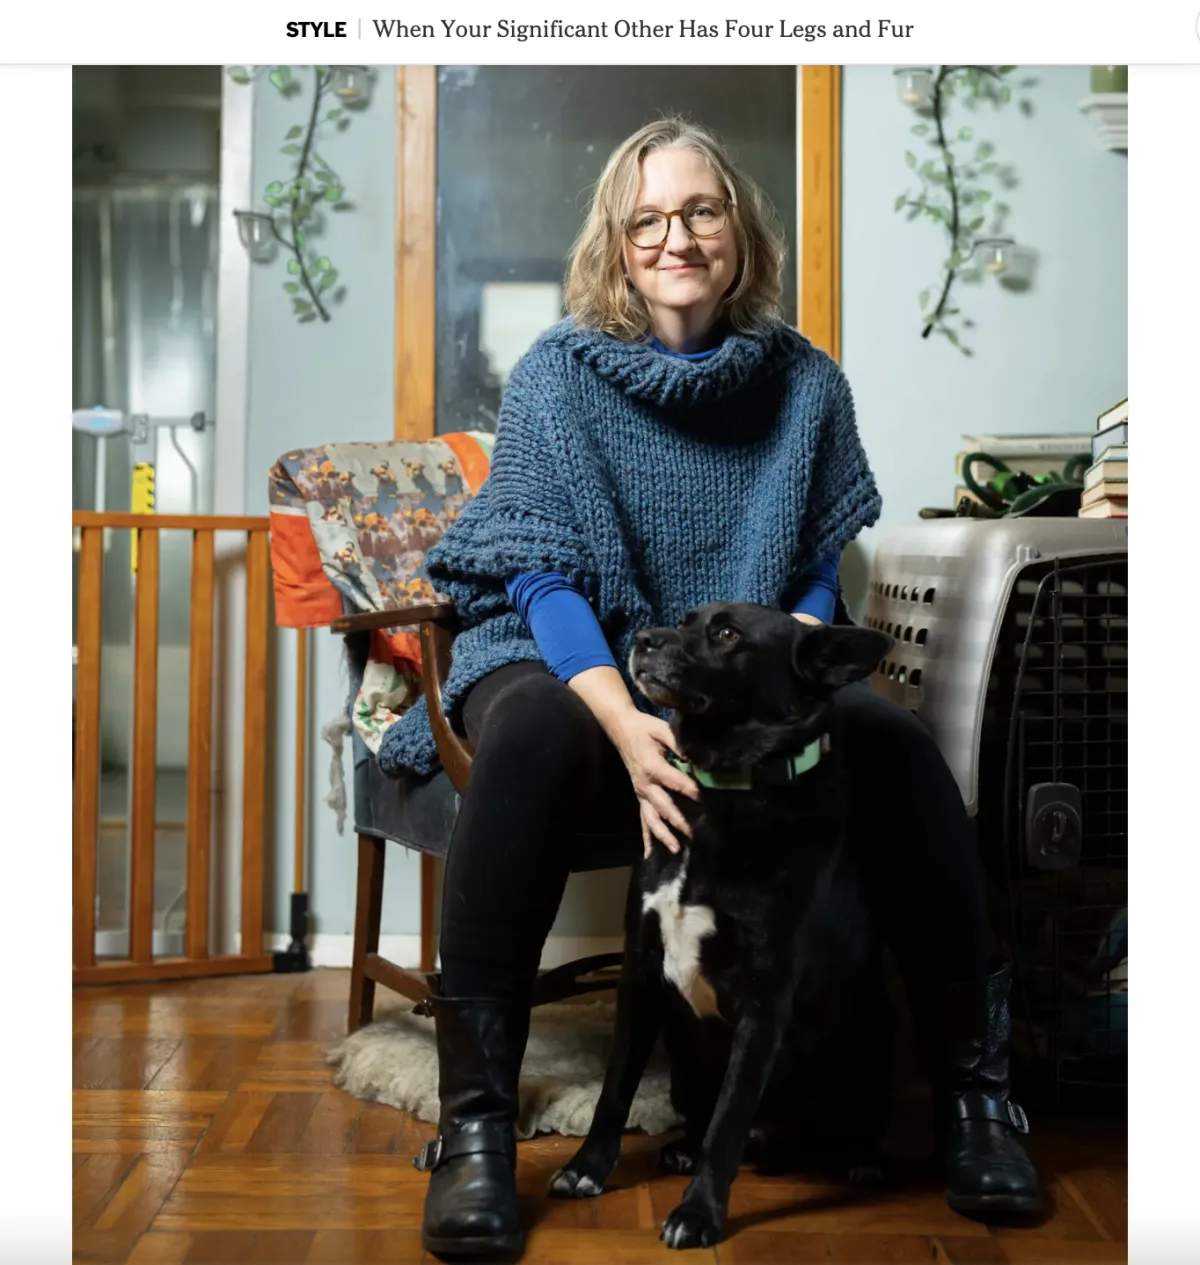 A woman in a blue sweater and black leggings sits in a chair with a black dog sitting on the floor in front of her.